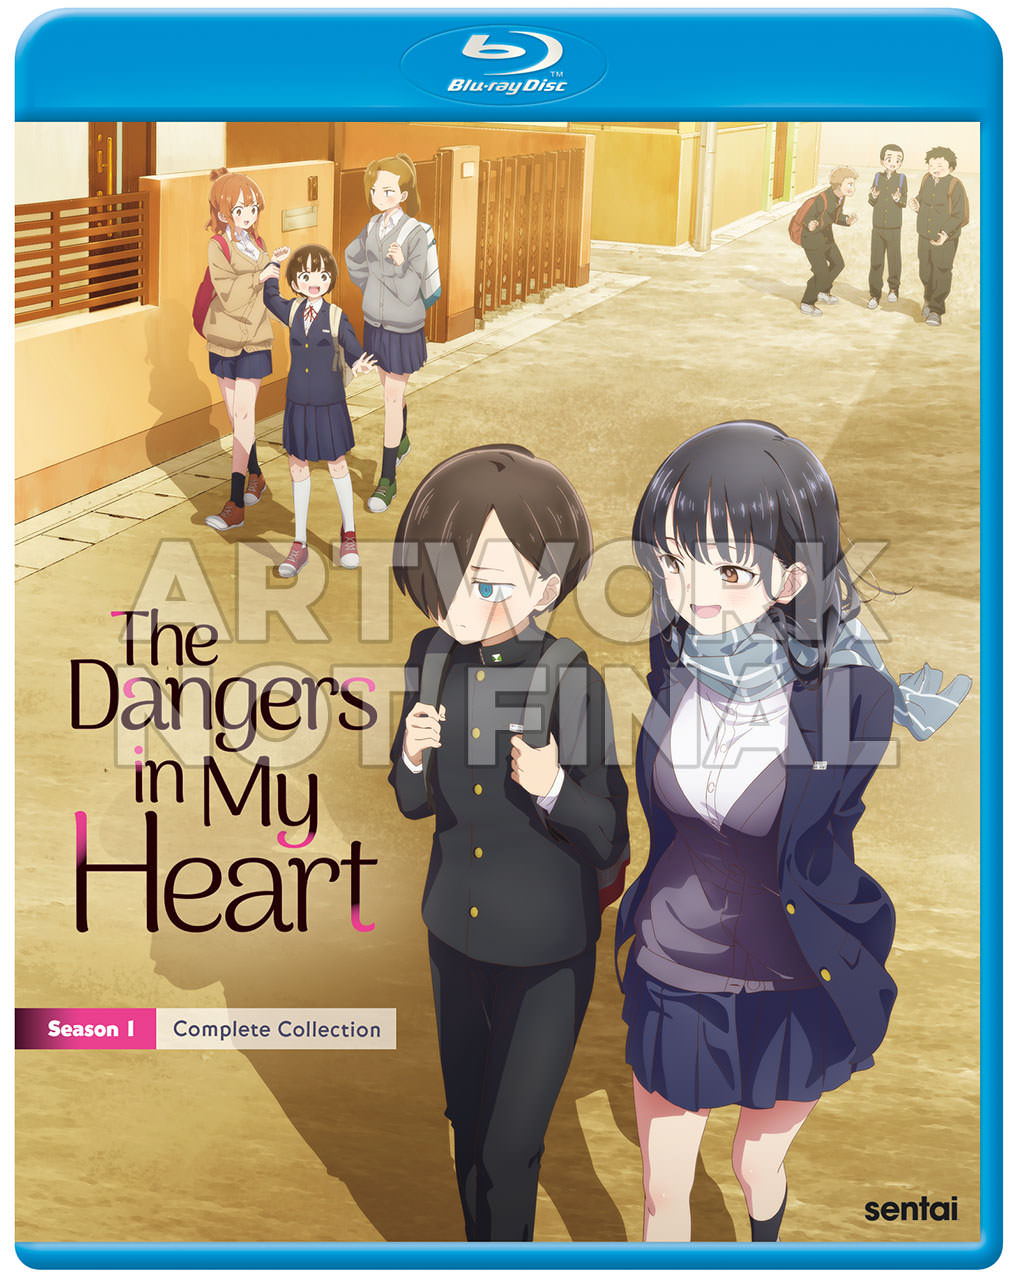 'The Dangers in My Heart' Blu-ray Cover Art provided by Sentai Filmworks